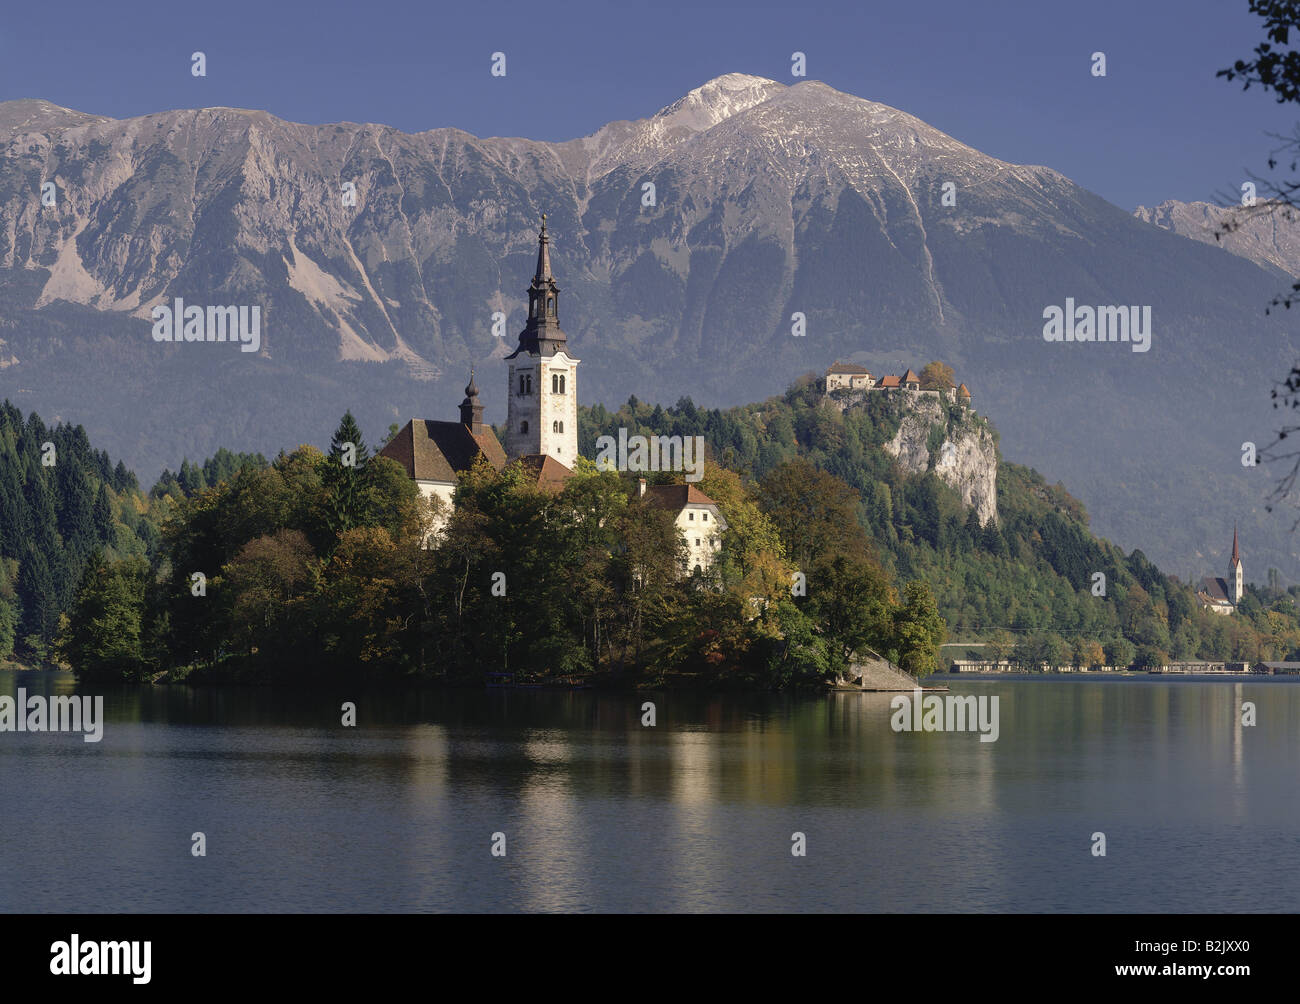 Geographie/Reisen, Slowenien, Obere Krain, Bled, Kirchen, Additional-Rights - Clearance-Info - Not-Available Stockfoto